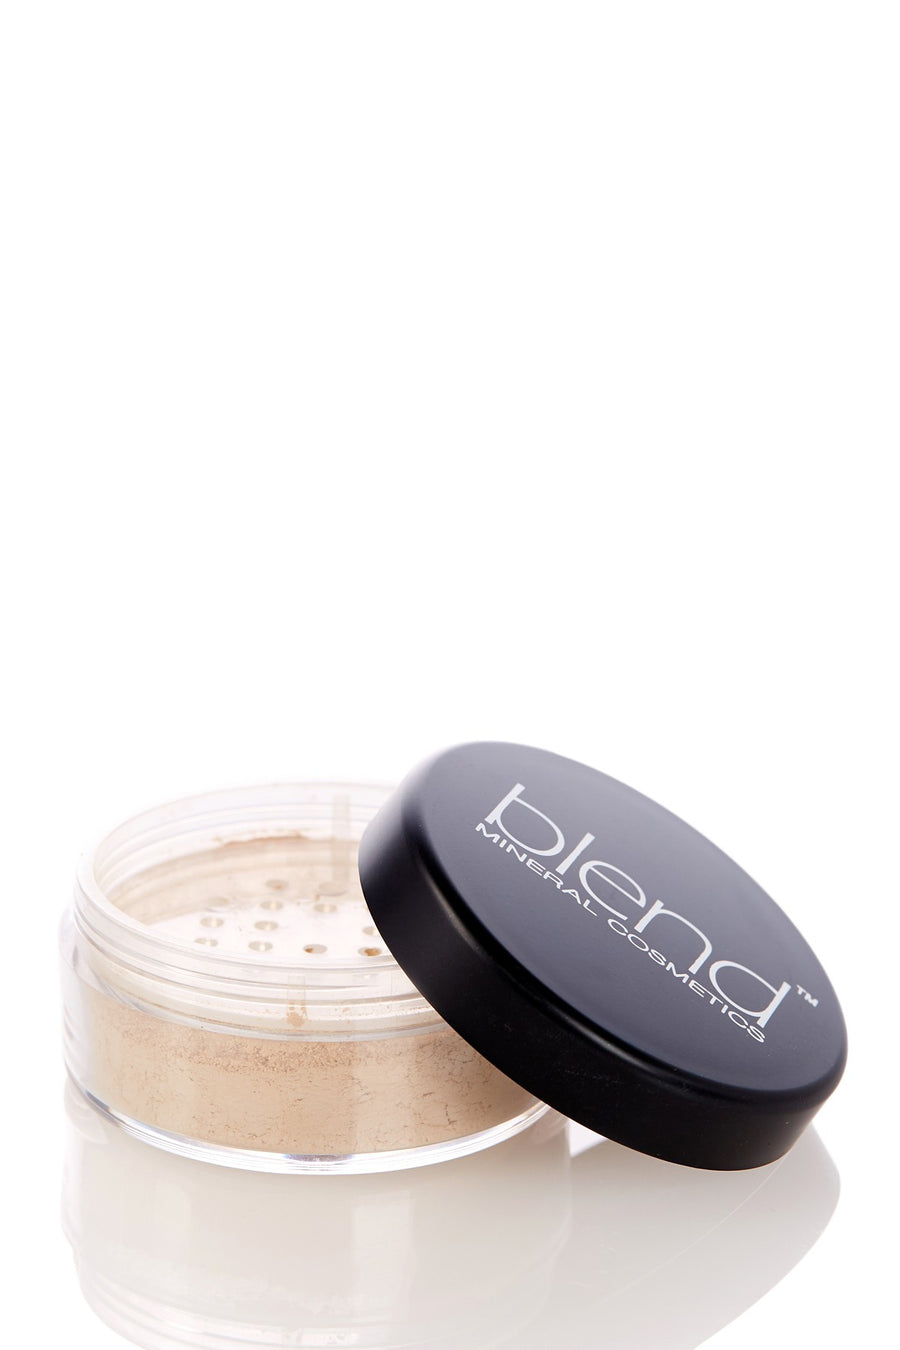 Shimmer Mineral SPF 15 Foundation #3 - Suede - Blend Mineral Cosmetics